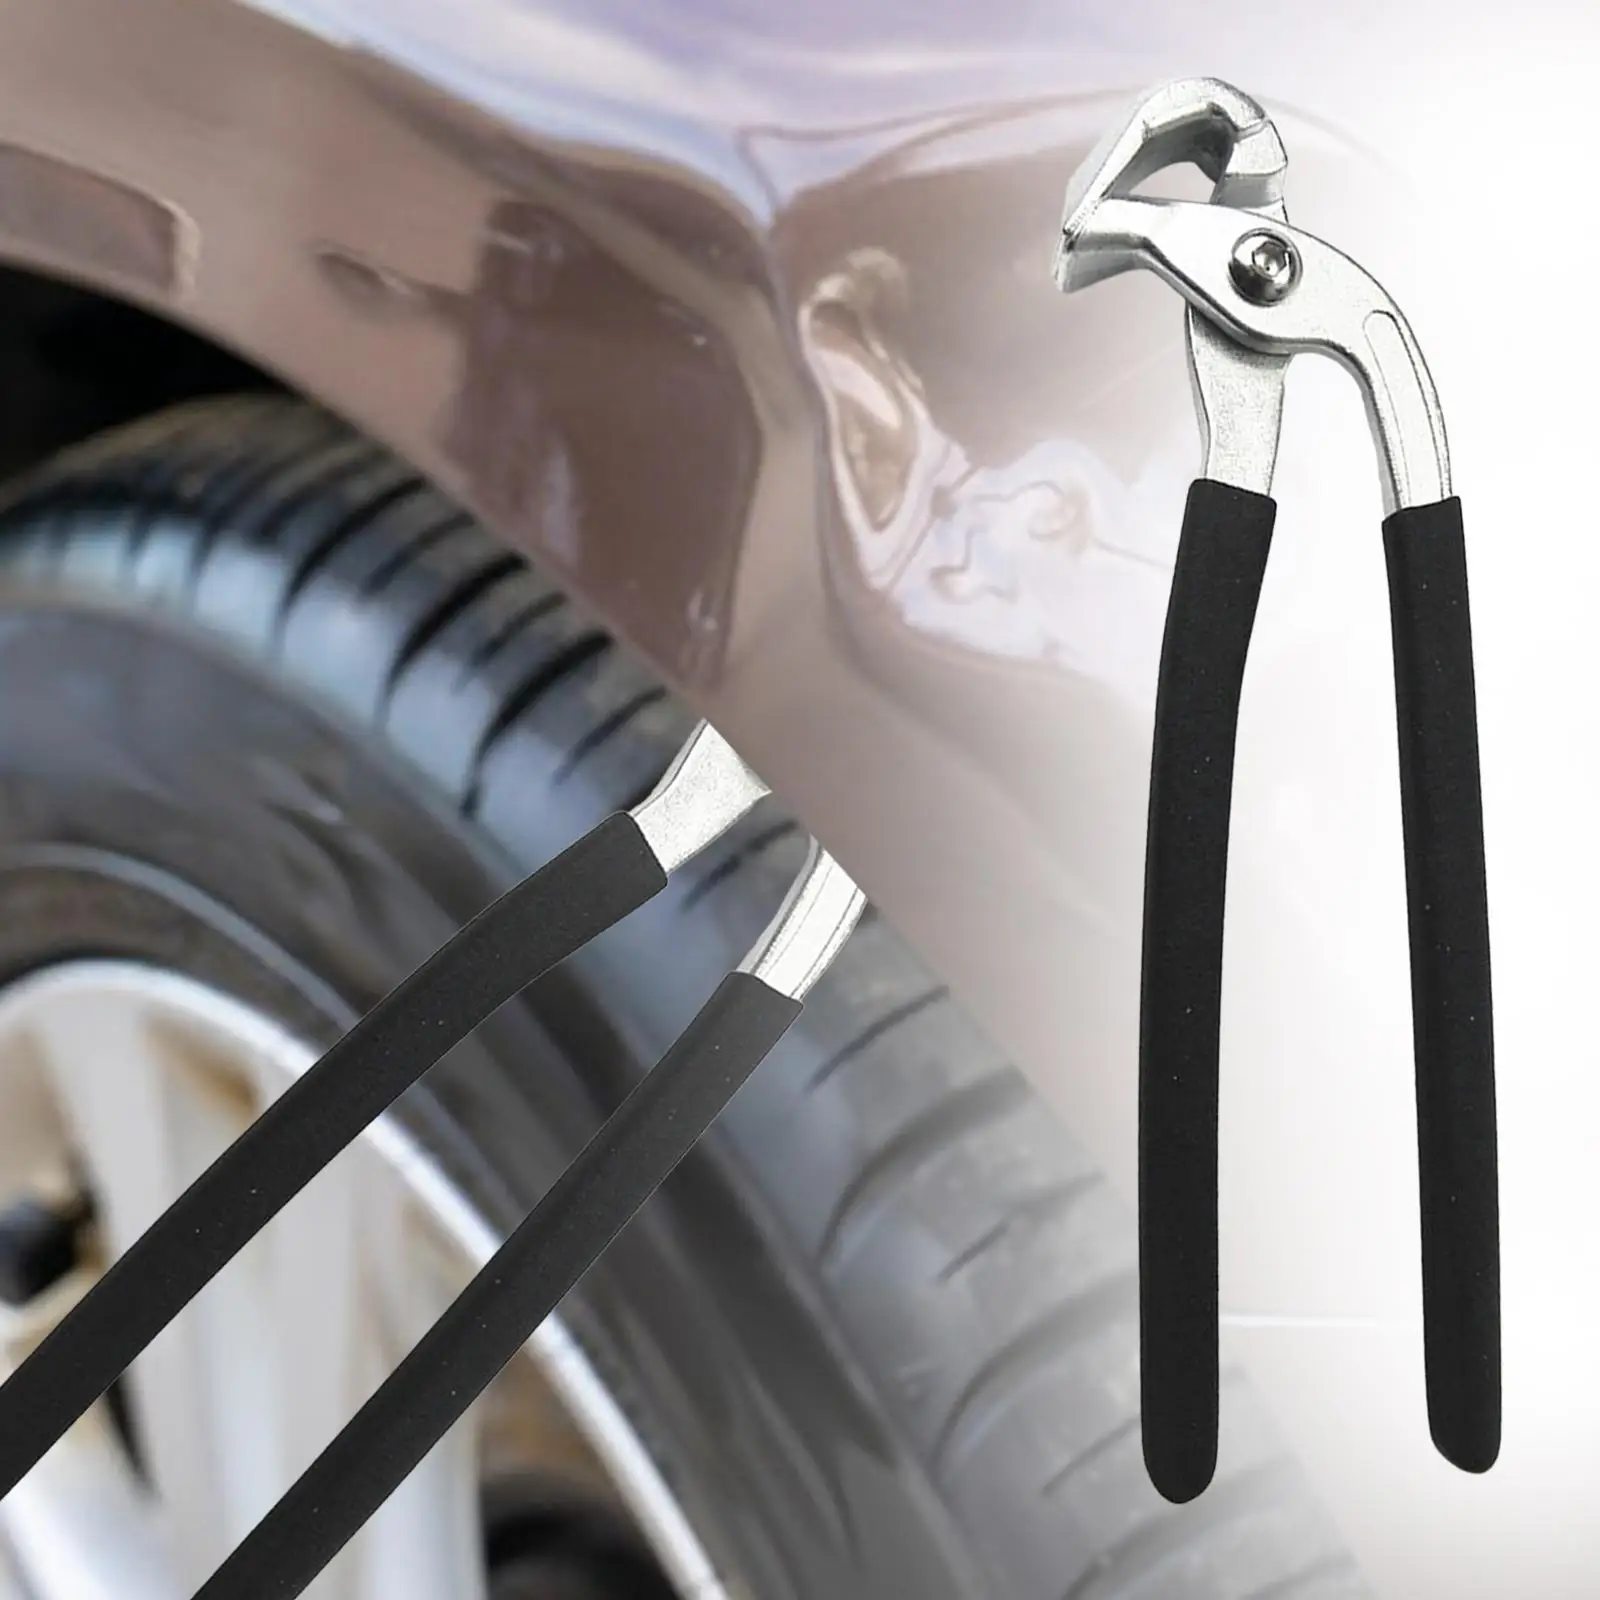 

Car Dent Repair Tools Easy to Use Silver Eagle Beak Pliers Surface Dent Removal Heavy Duty Auto Body Repair Tools Edge Pliers